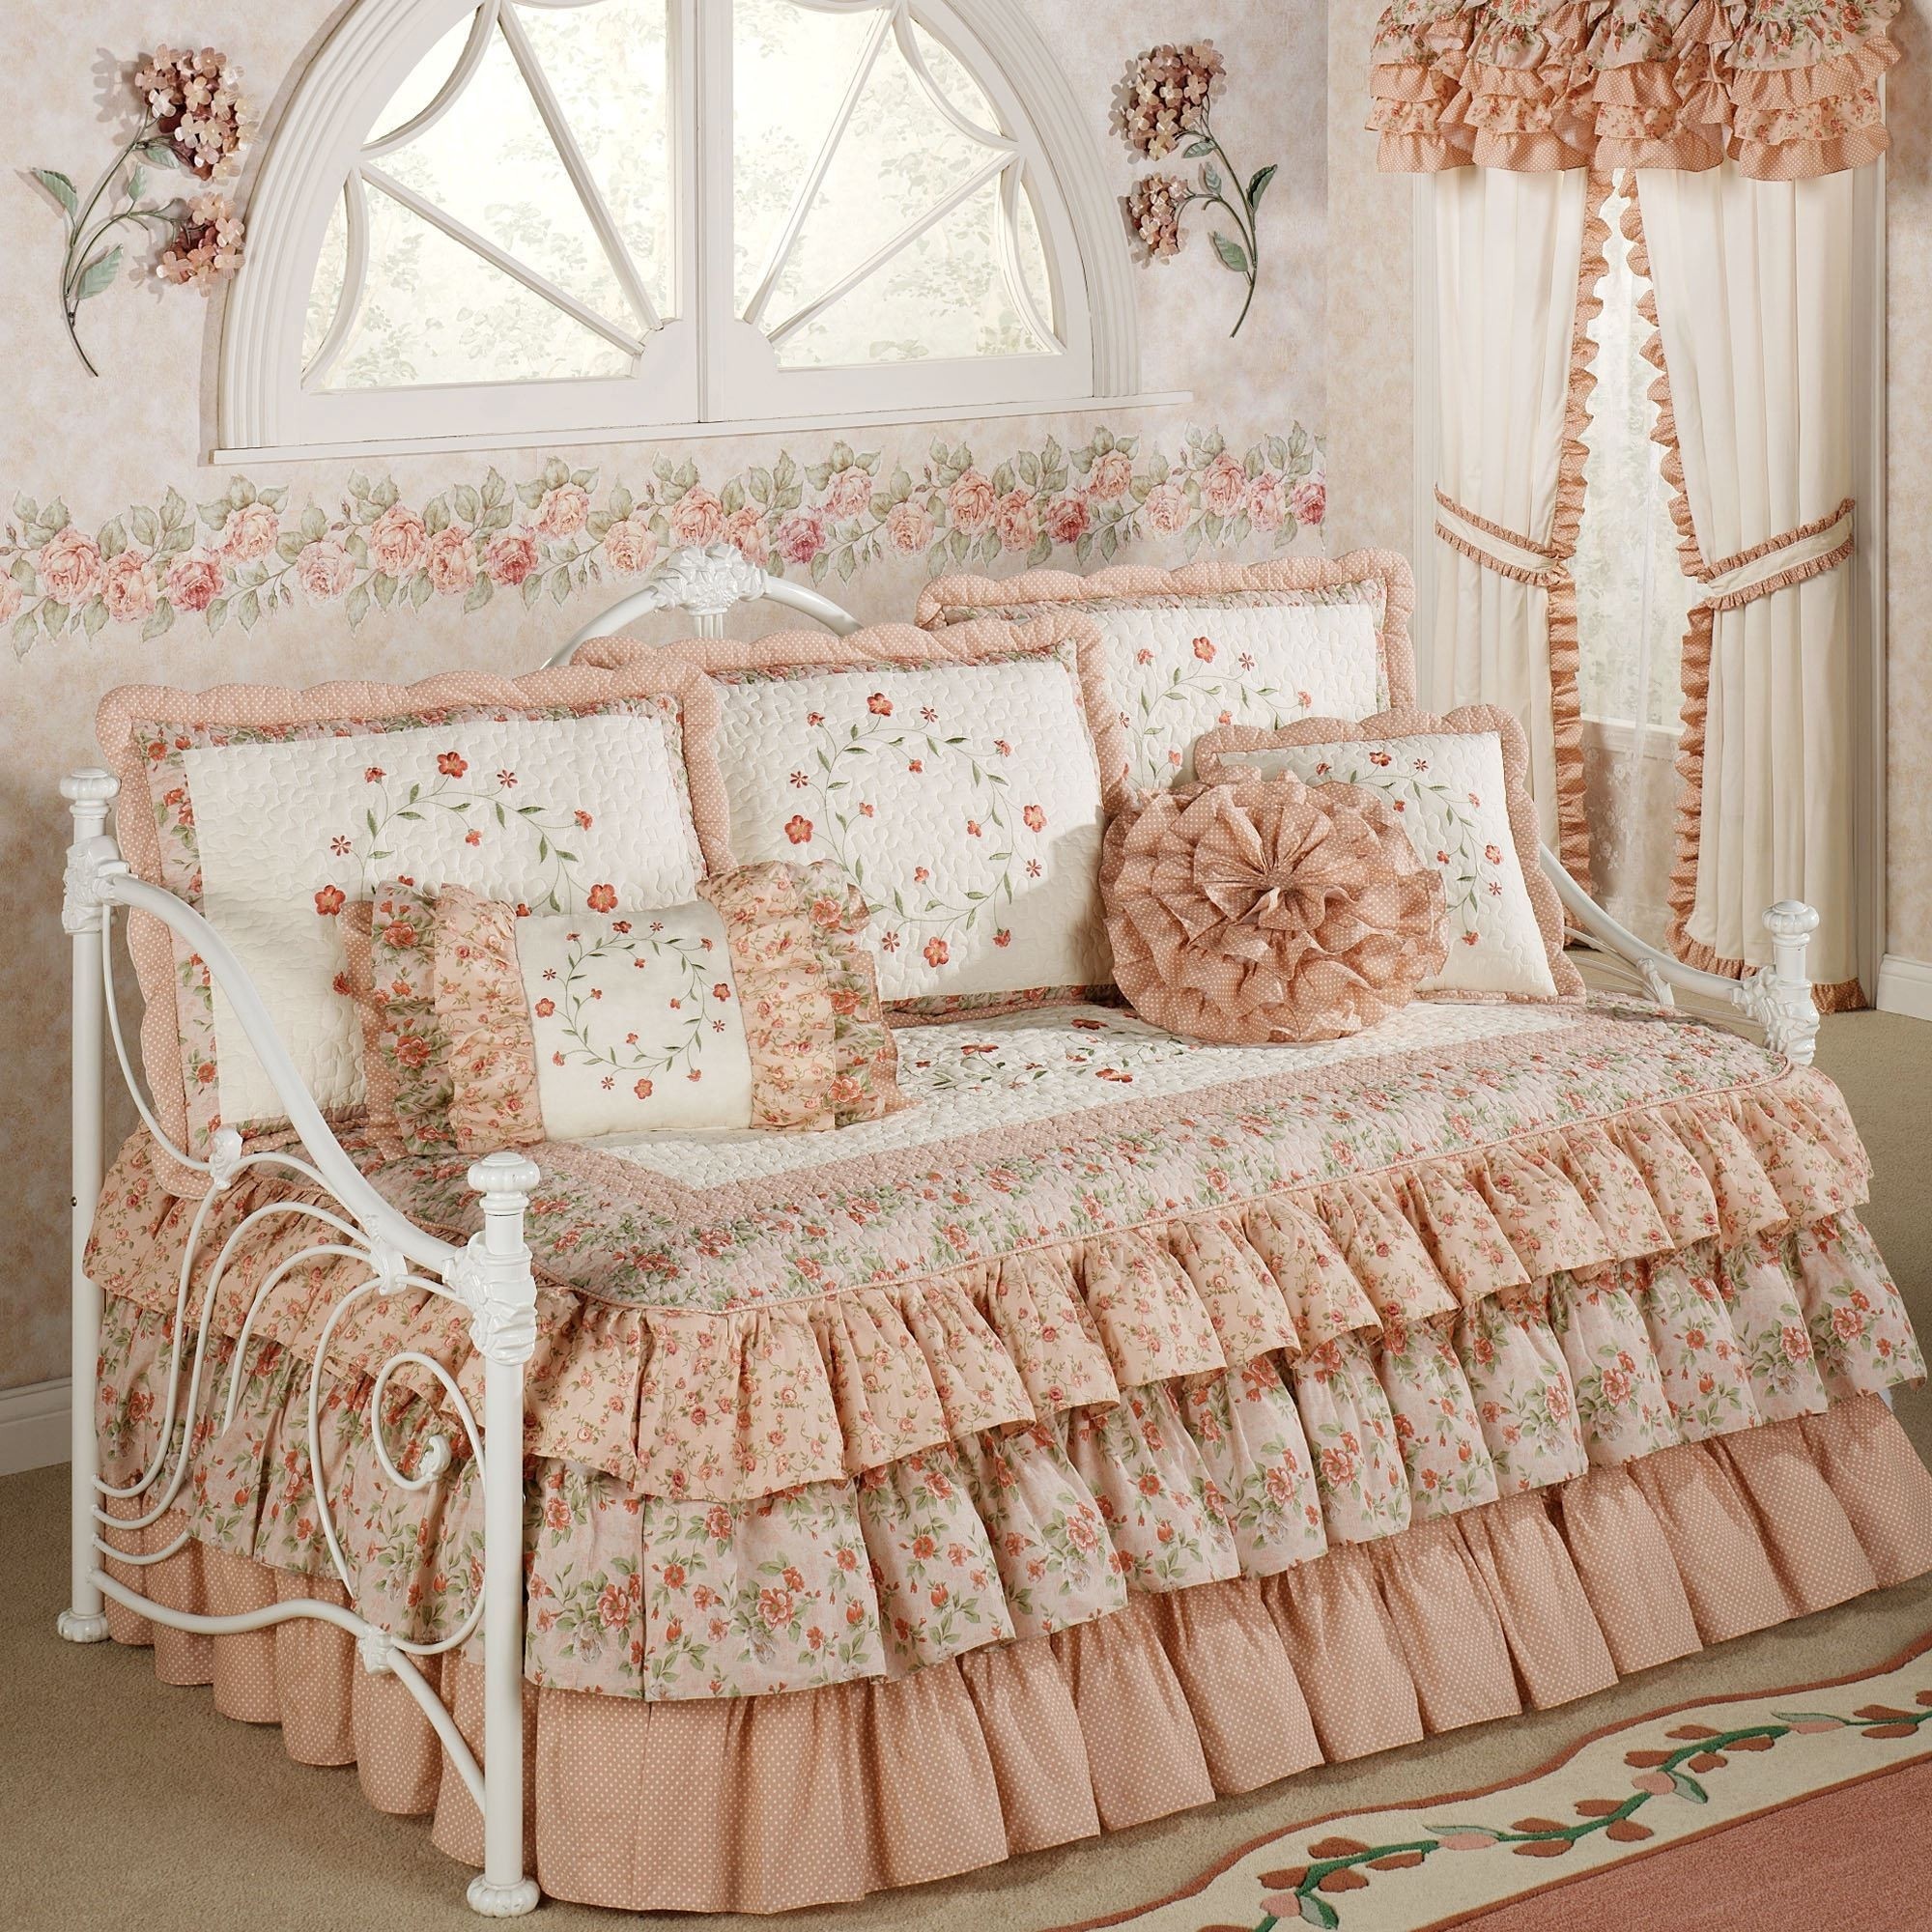 Melody ruffled daybed set coral daybed